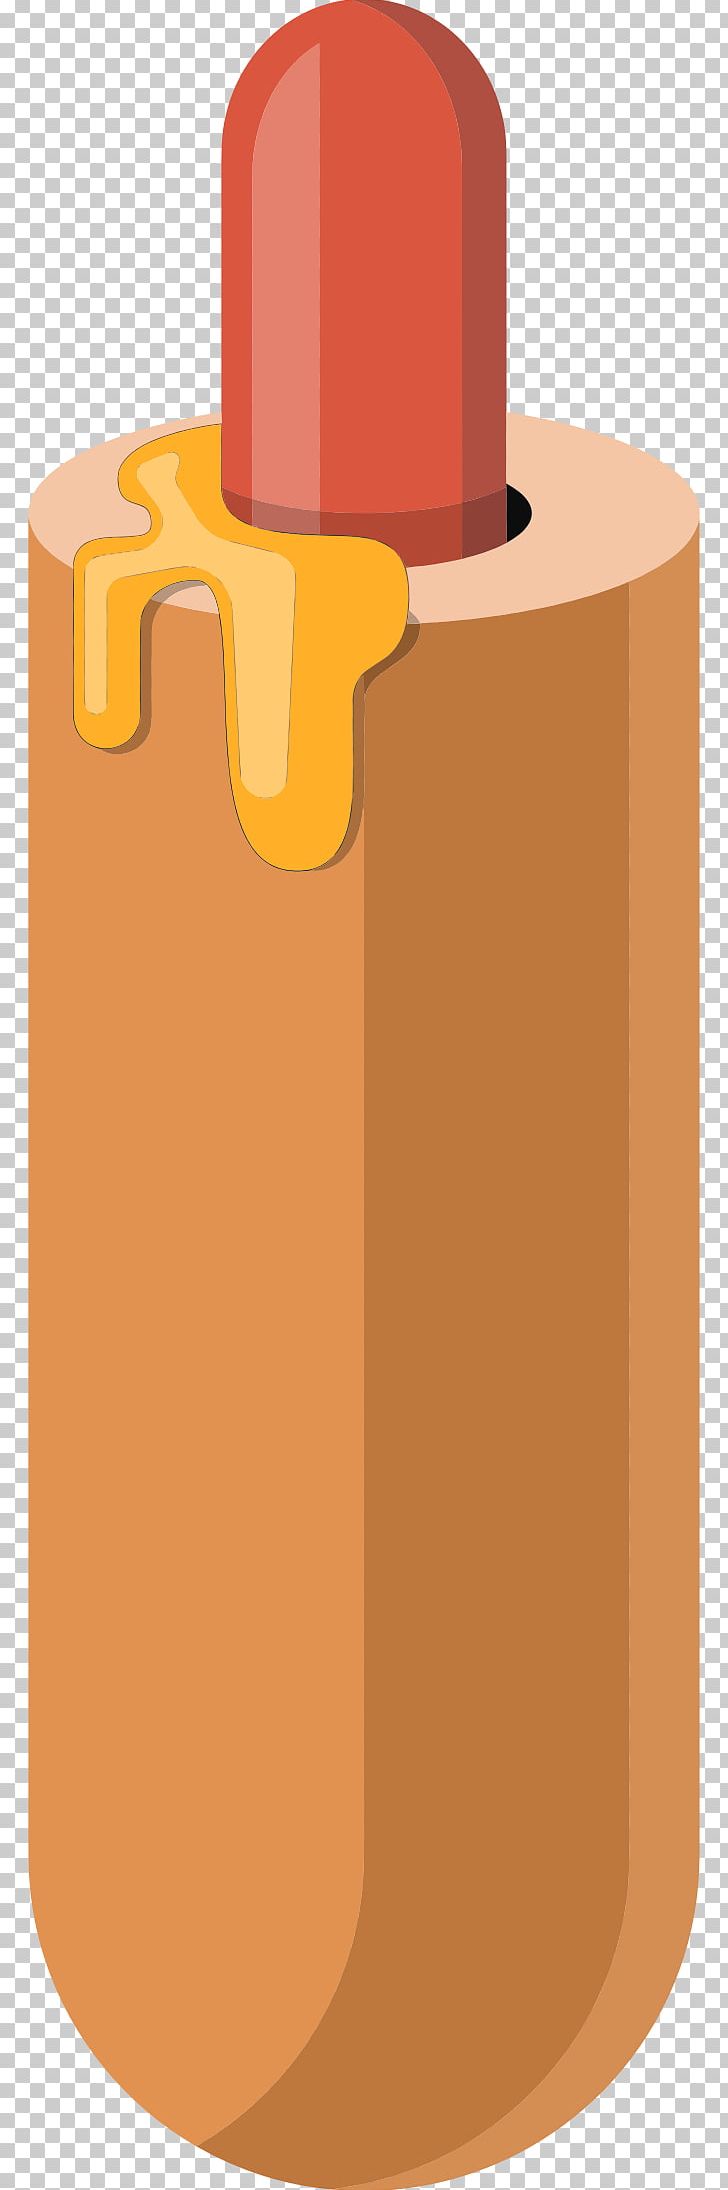 Corn Dog Hot Dog Popcorn Fast Food Candy Corn PNG, Clipart, Candy Corn, Corn Dog, Cylinder, Eating, Fast Food Free PNG Download